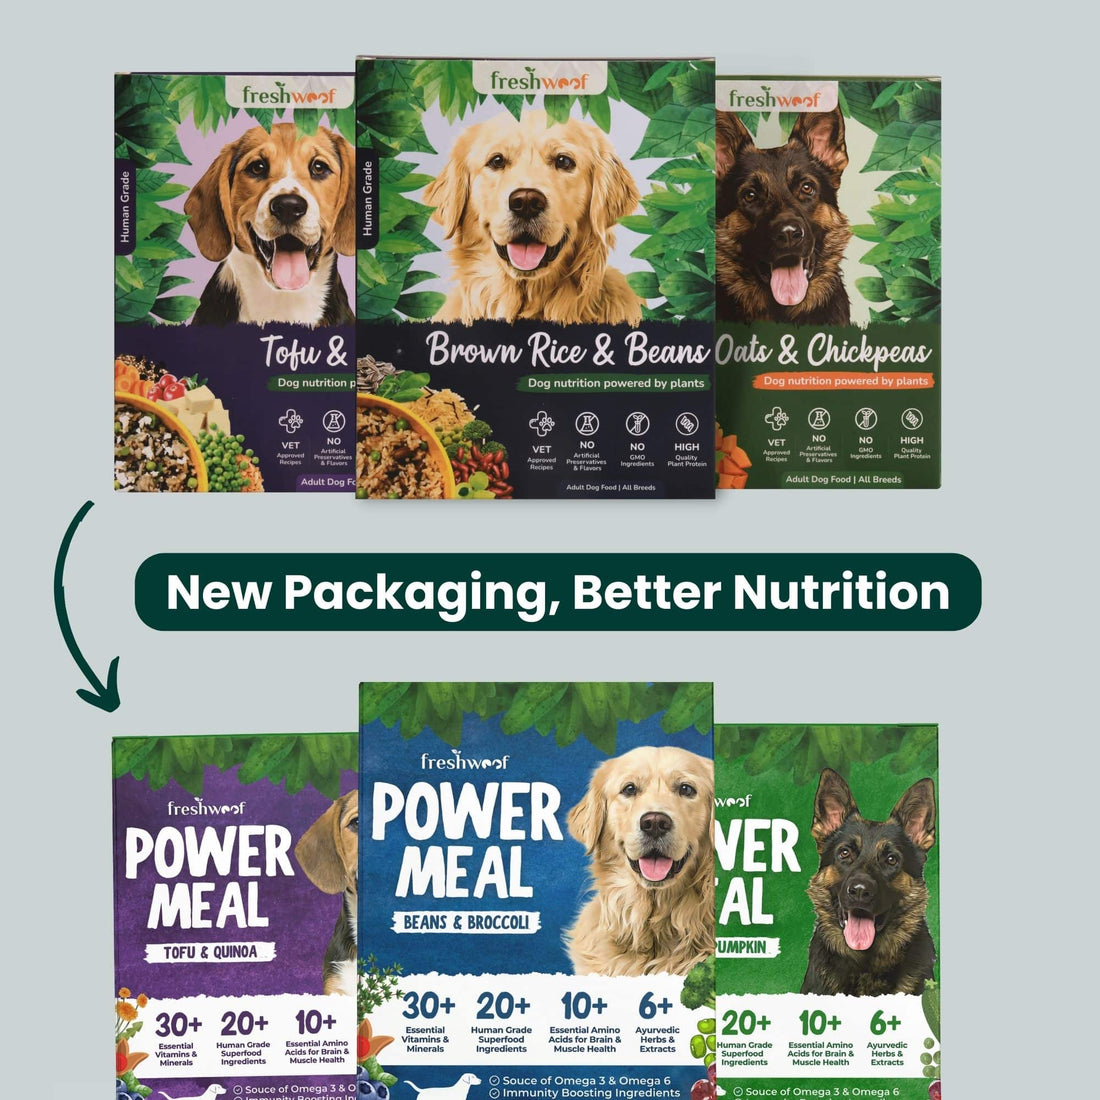 Freshwoof Power Meals | 100% Natural Wet Dog Food with Added Vitamins & Minerals (Beans & Broccoli)